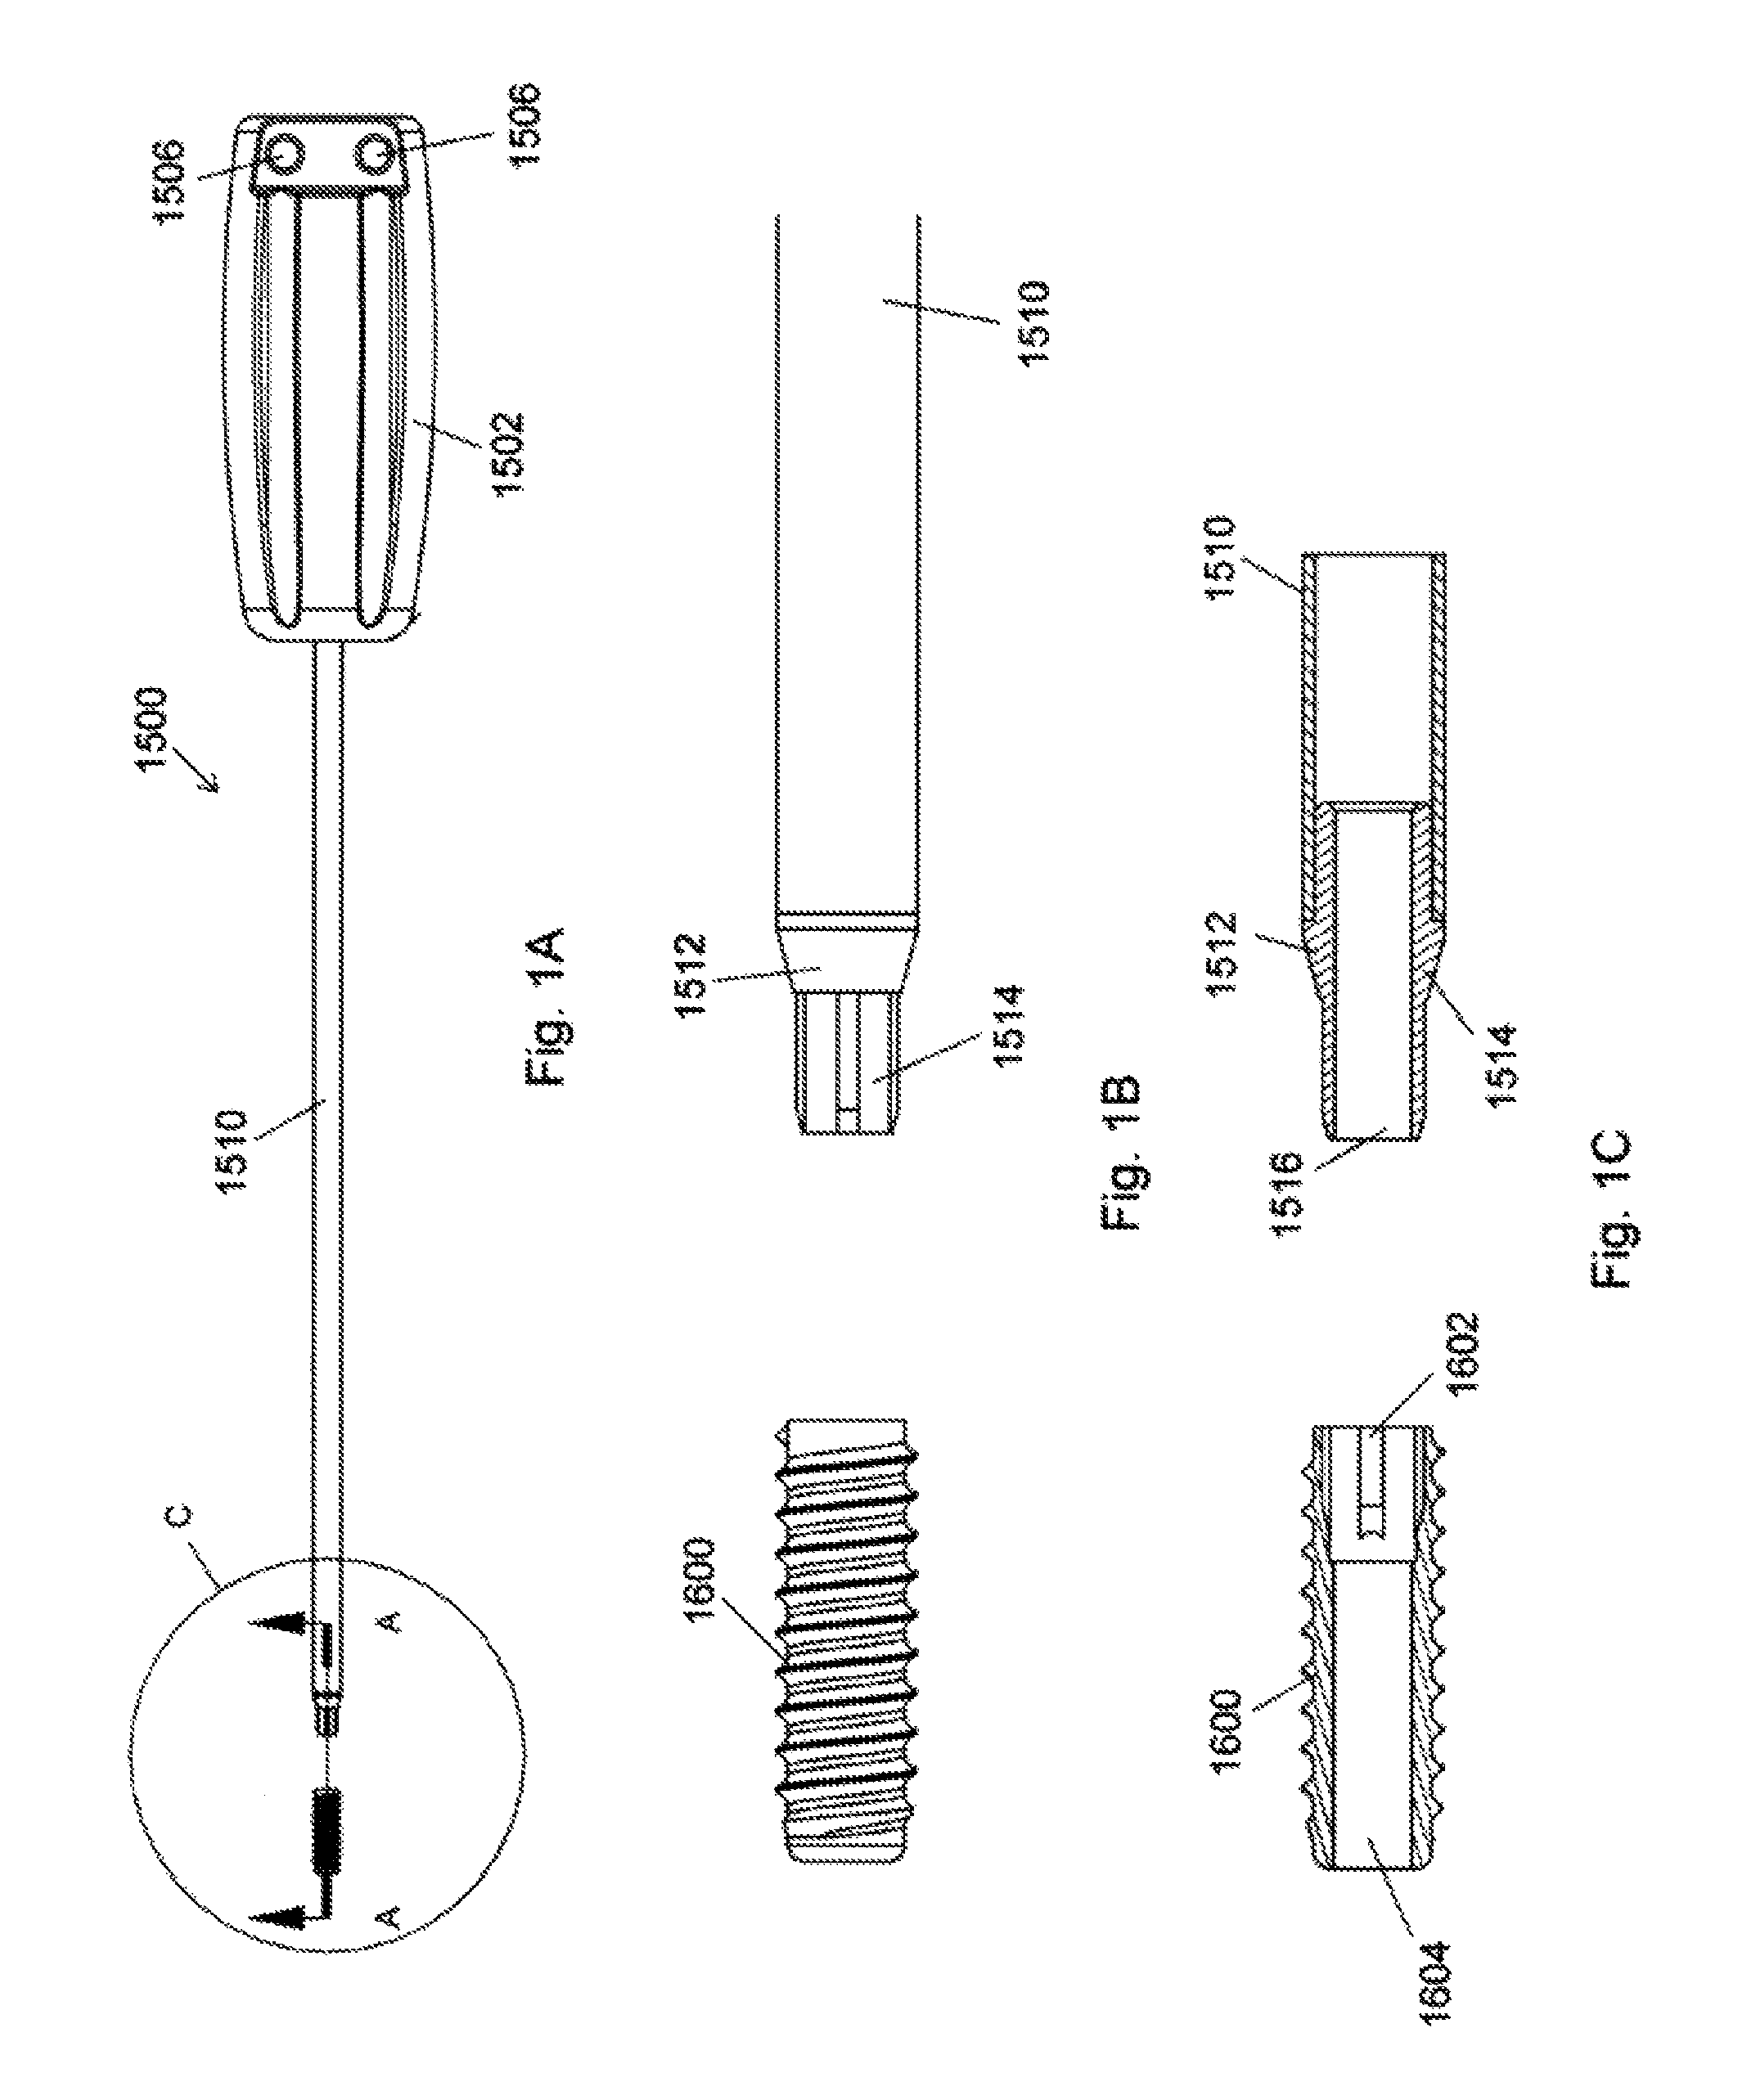 Implant placement systems, devices and methods